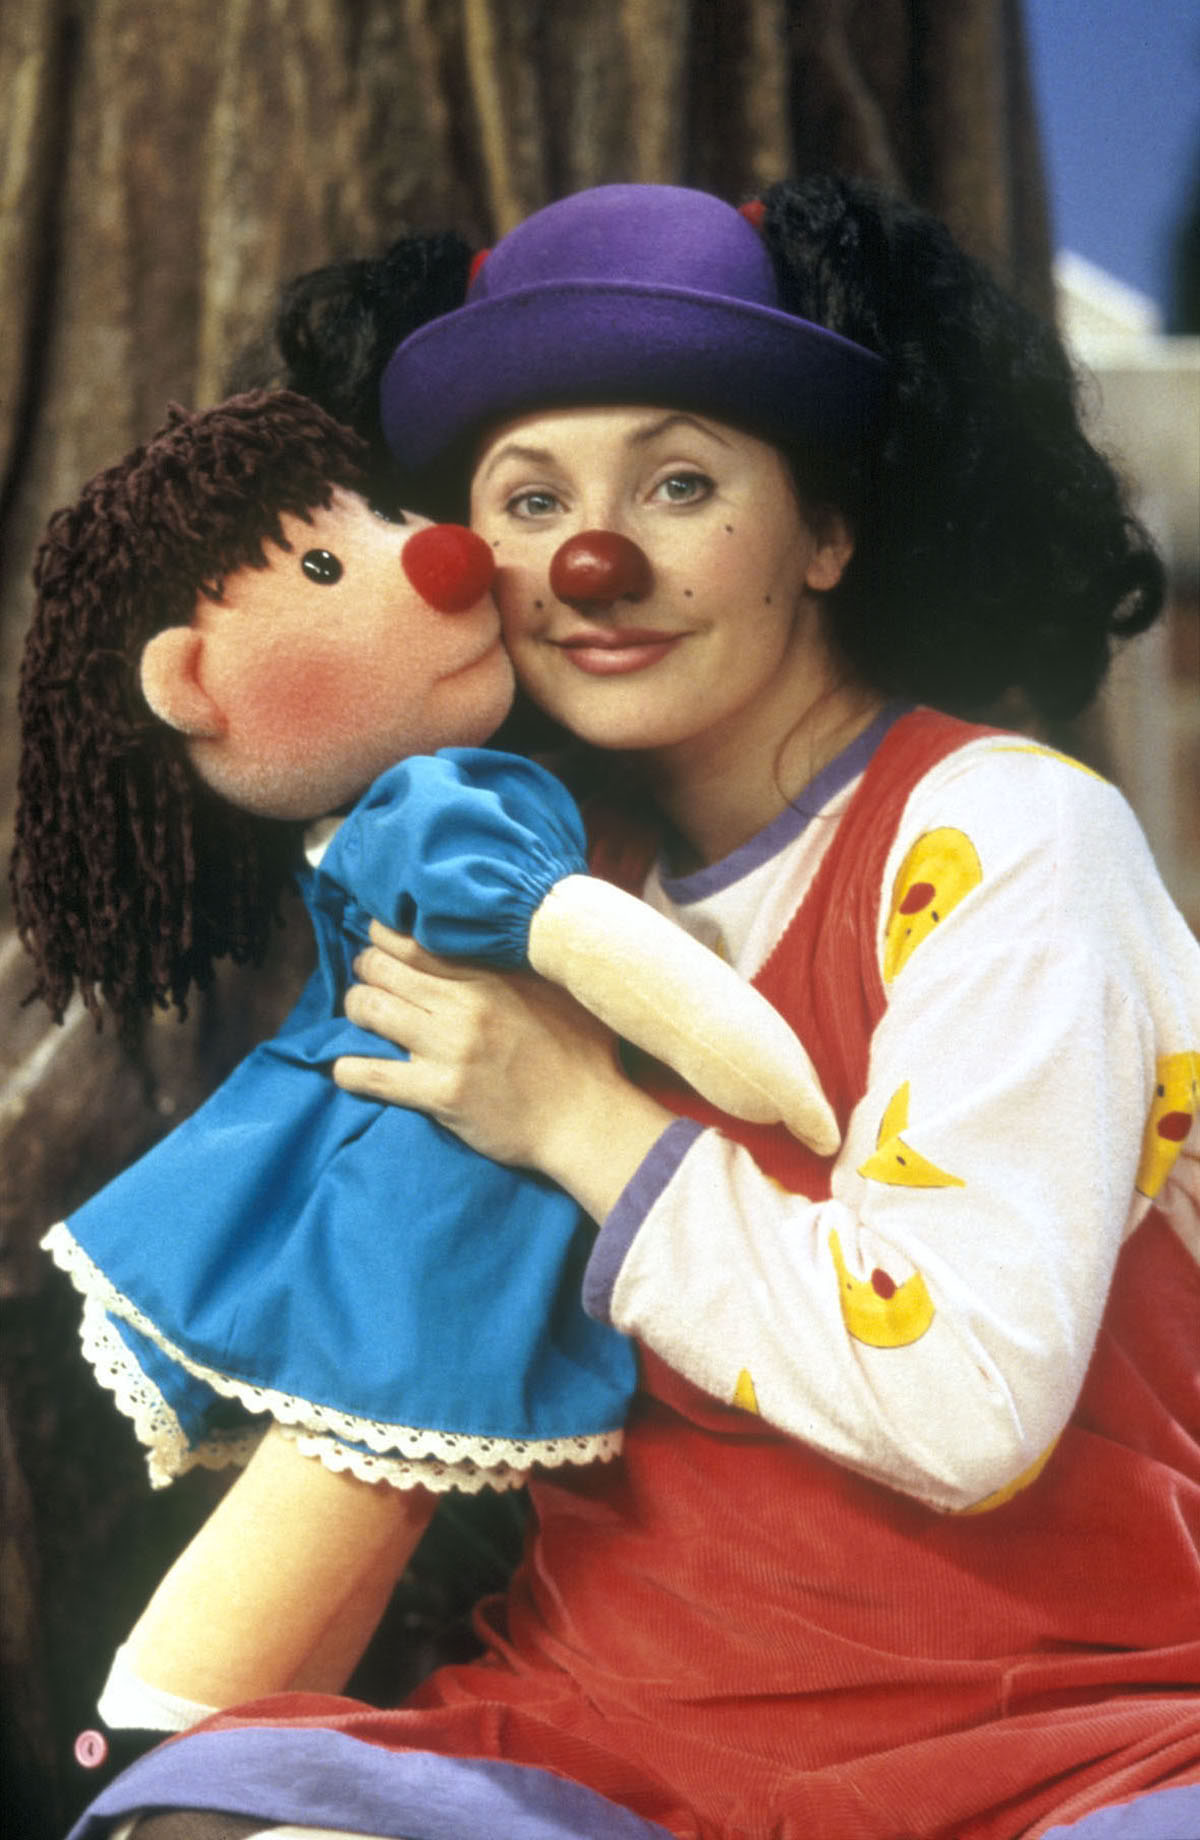 The Big Comfy Couch Loonette and Molly Forever and Always DVD